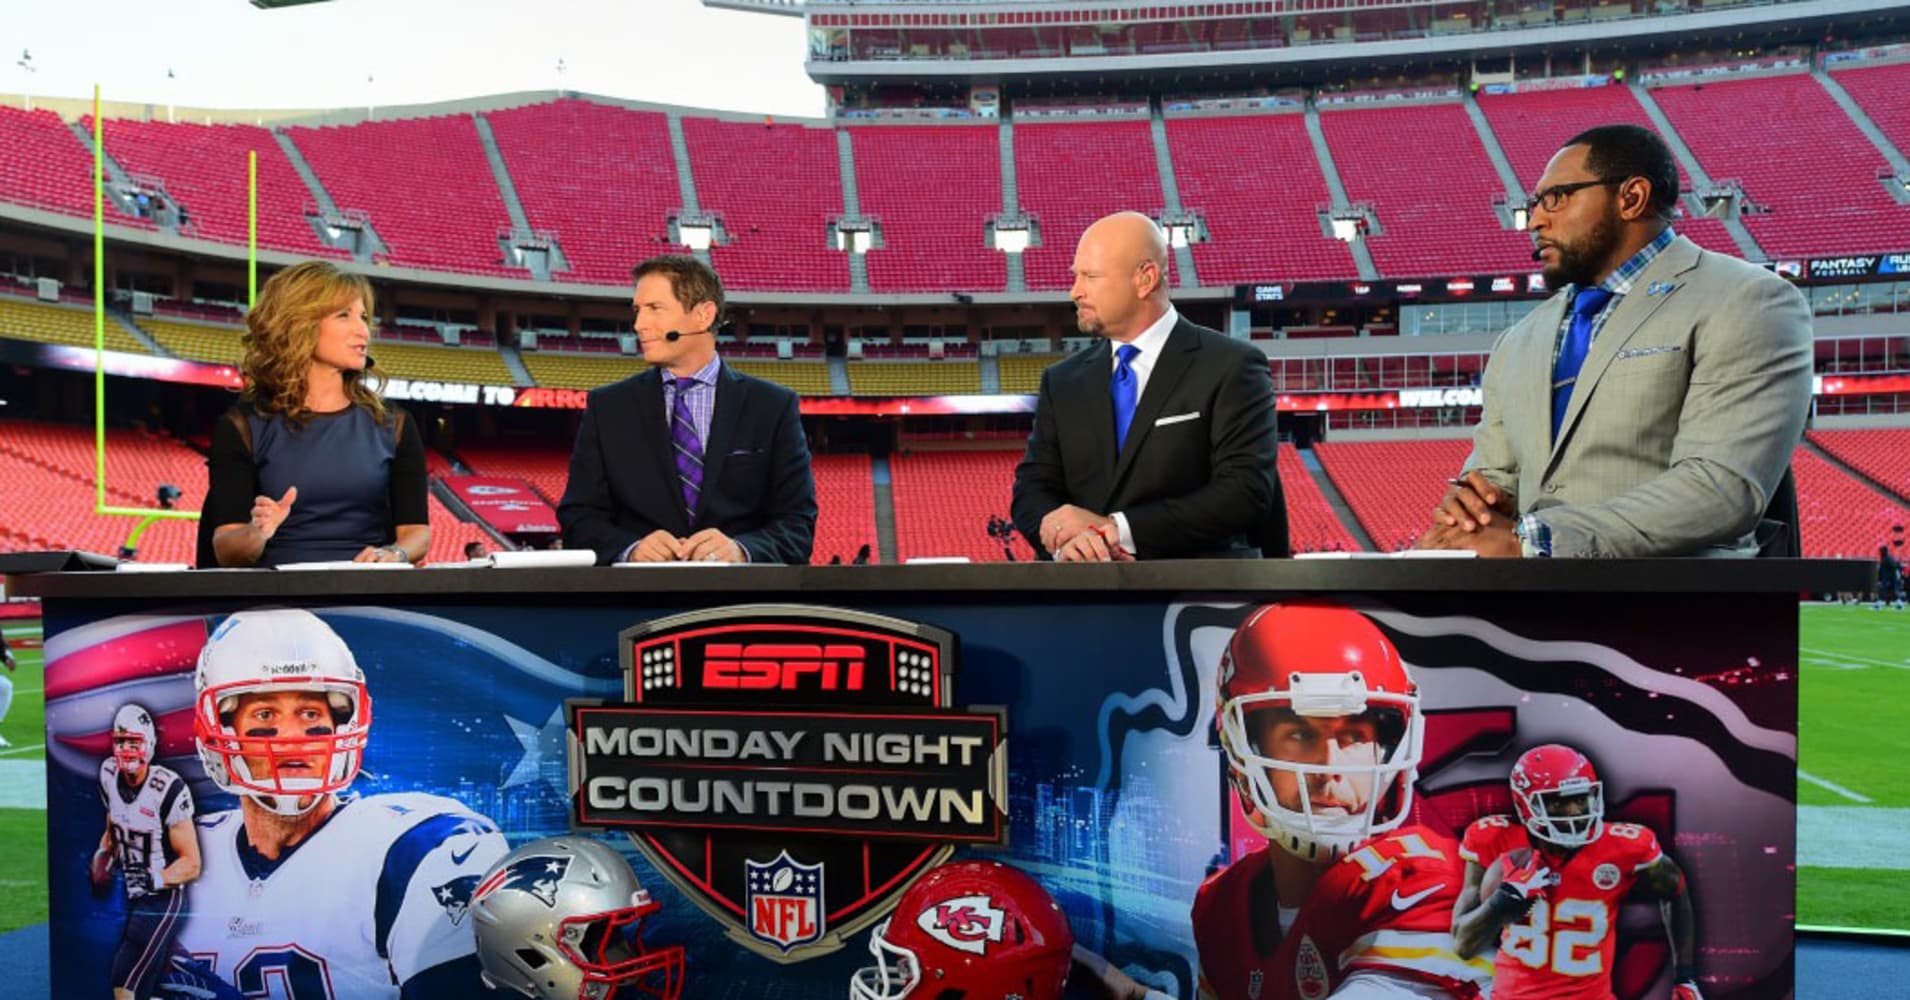 ESPN is well-positioned to keep NFL rights